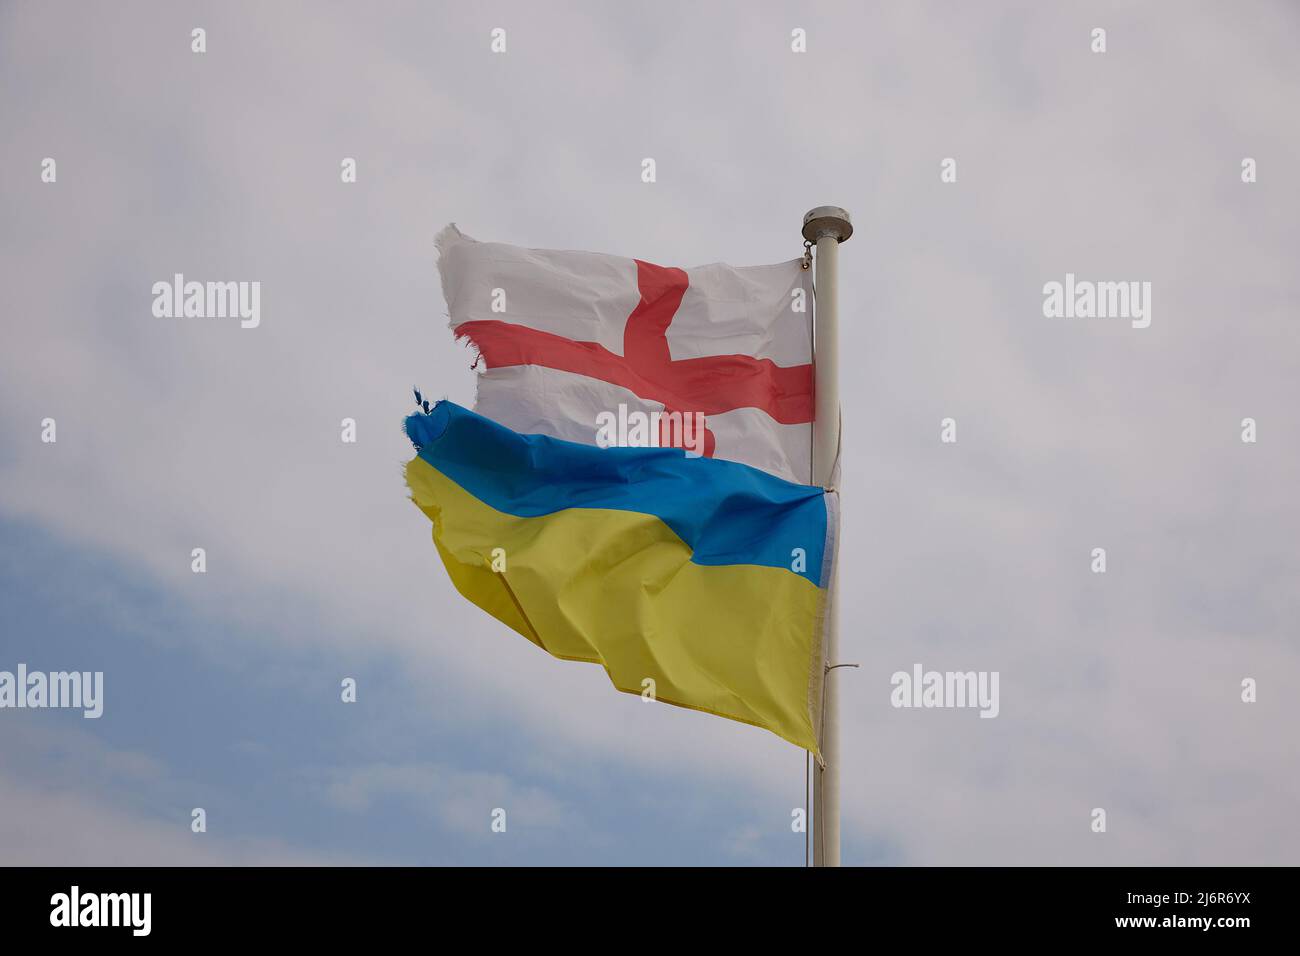 English and Ukrainian flags seen together outdoors on one flag pole Stock Photo